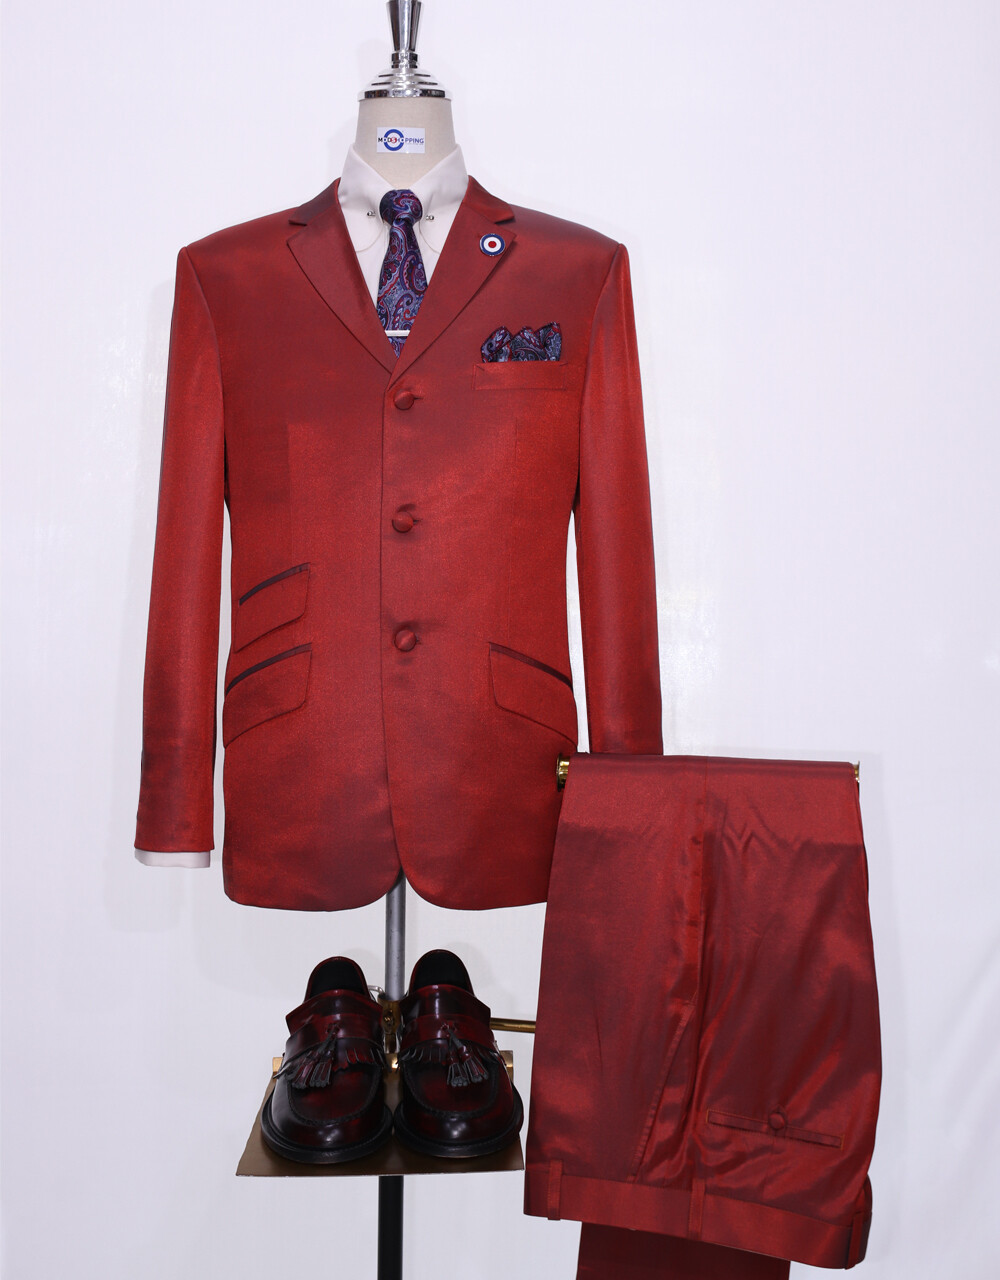 Burnt Orange And Pine Two Tone Suit For Men